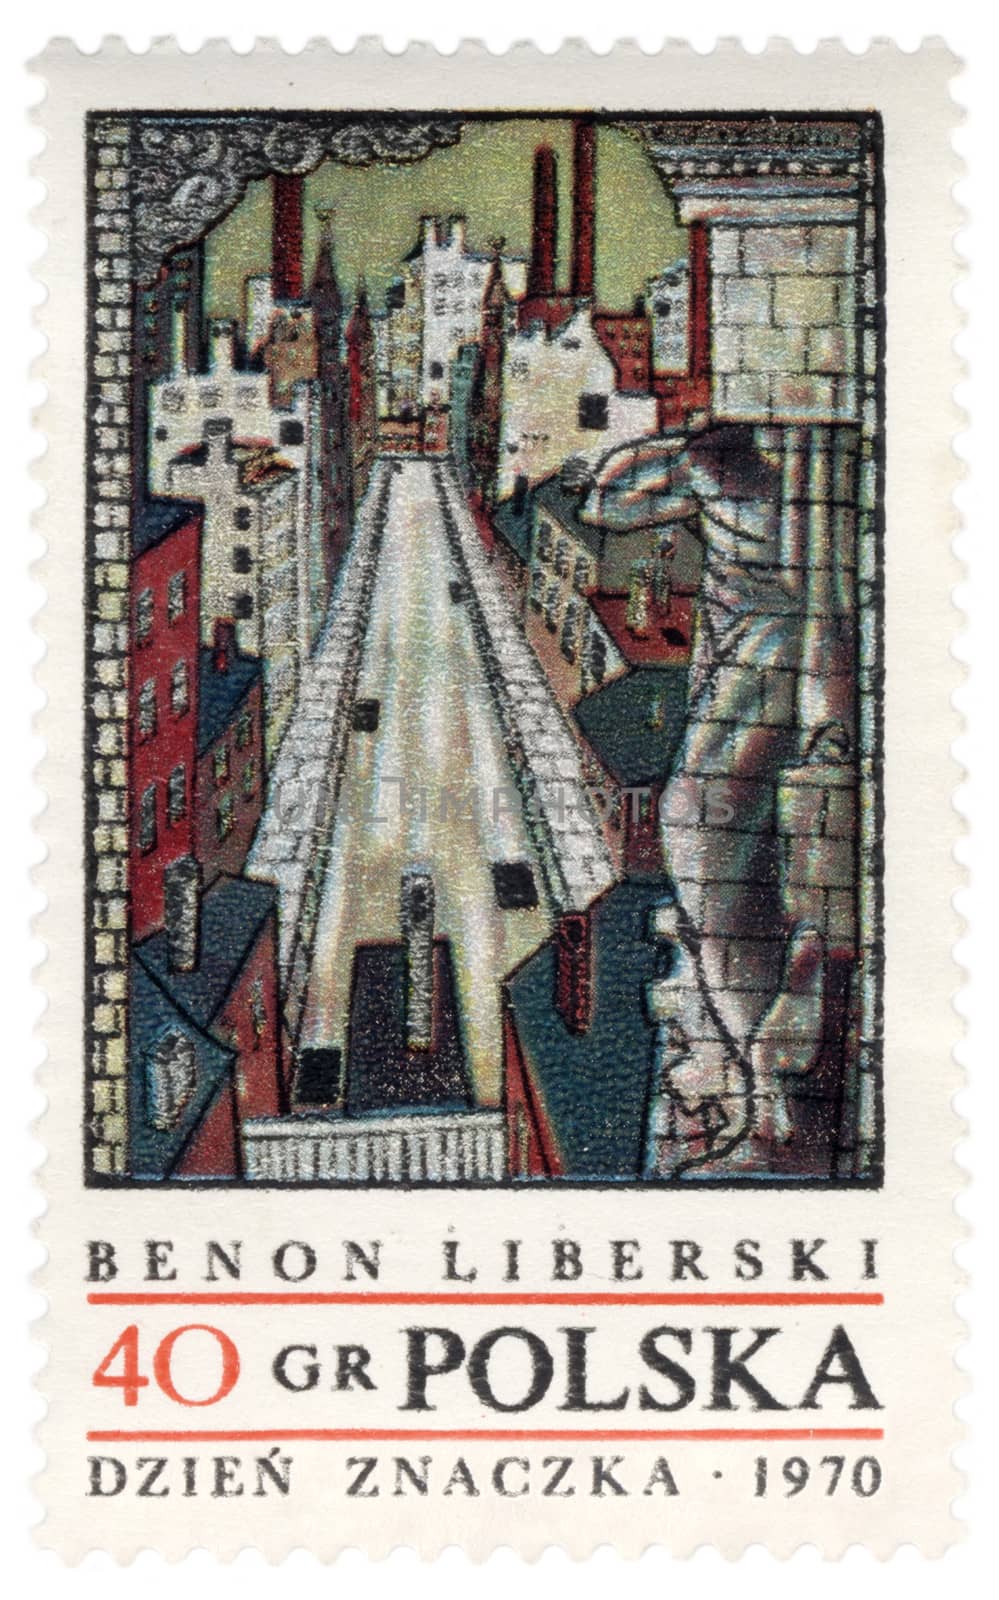 POLAND - CIRCA 1970: a stamp printed in Poland, shows picture of polish painter and graphic artist Benon Liberski (1926-1983), circa 1970